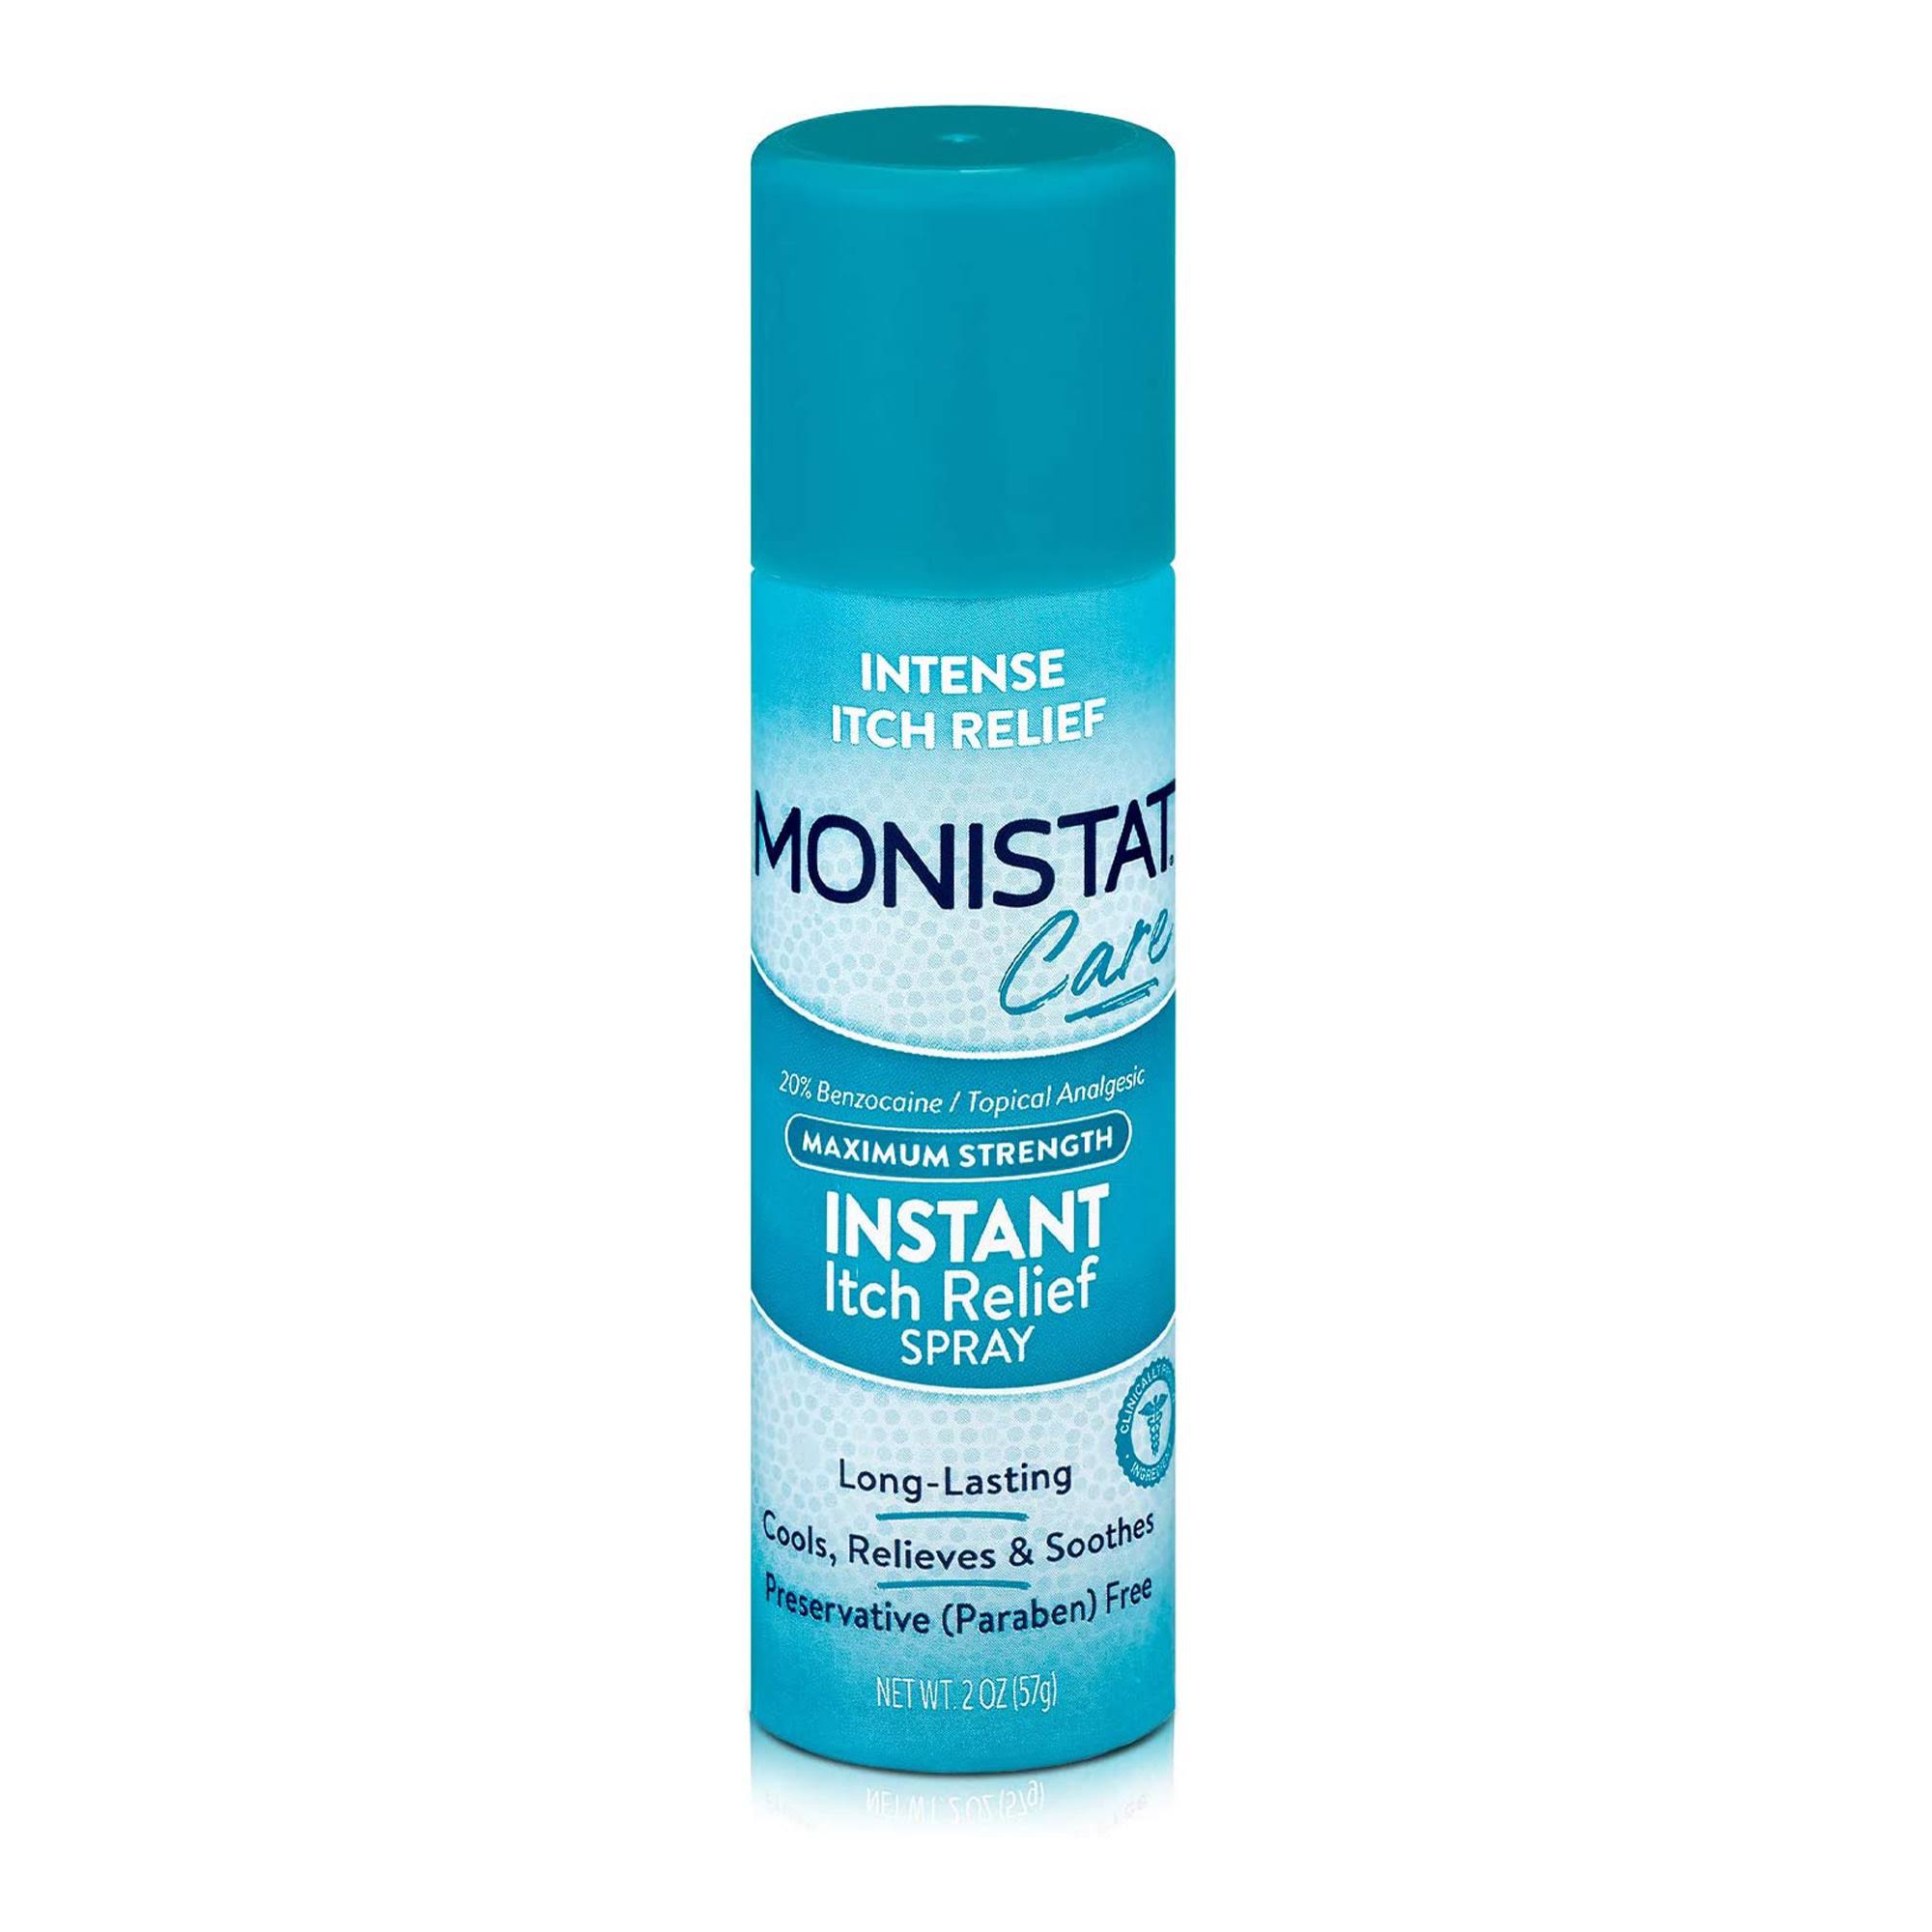 Monistat Complete Care Instant Itch Relief Spray - 2oz